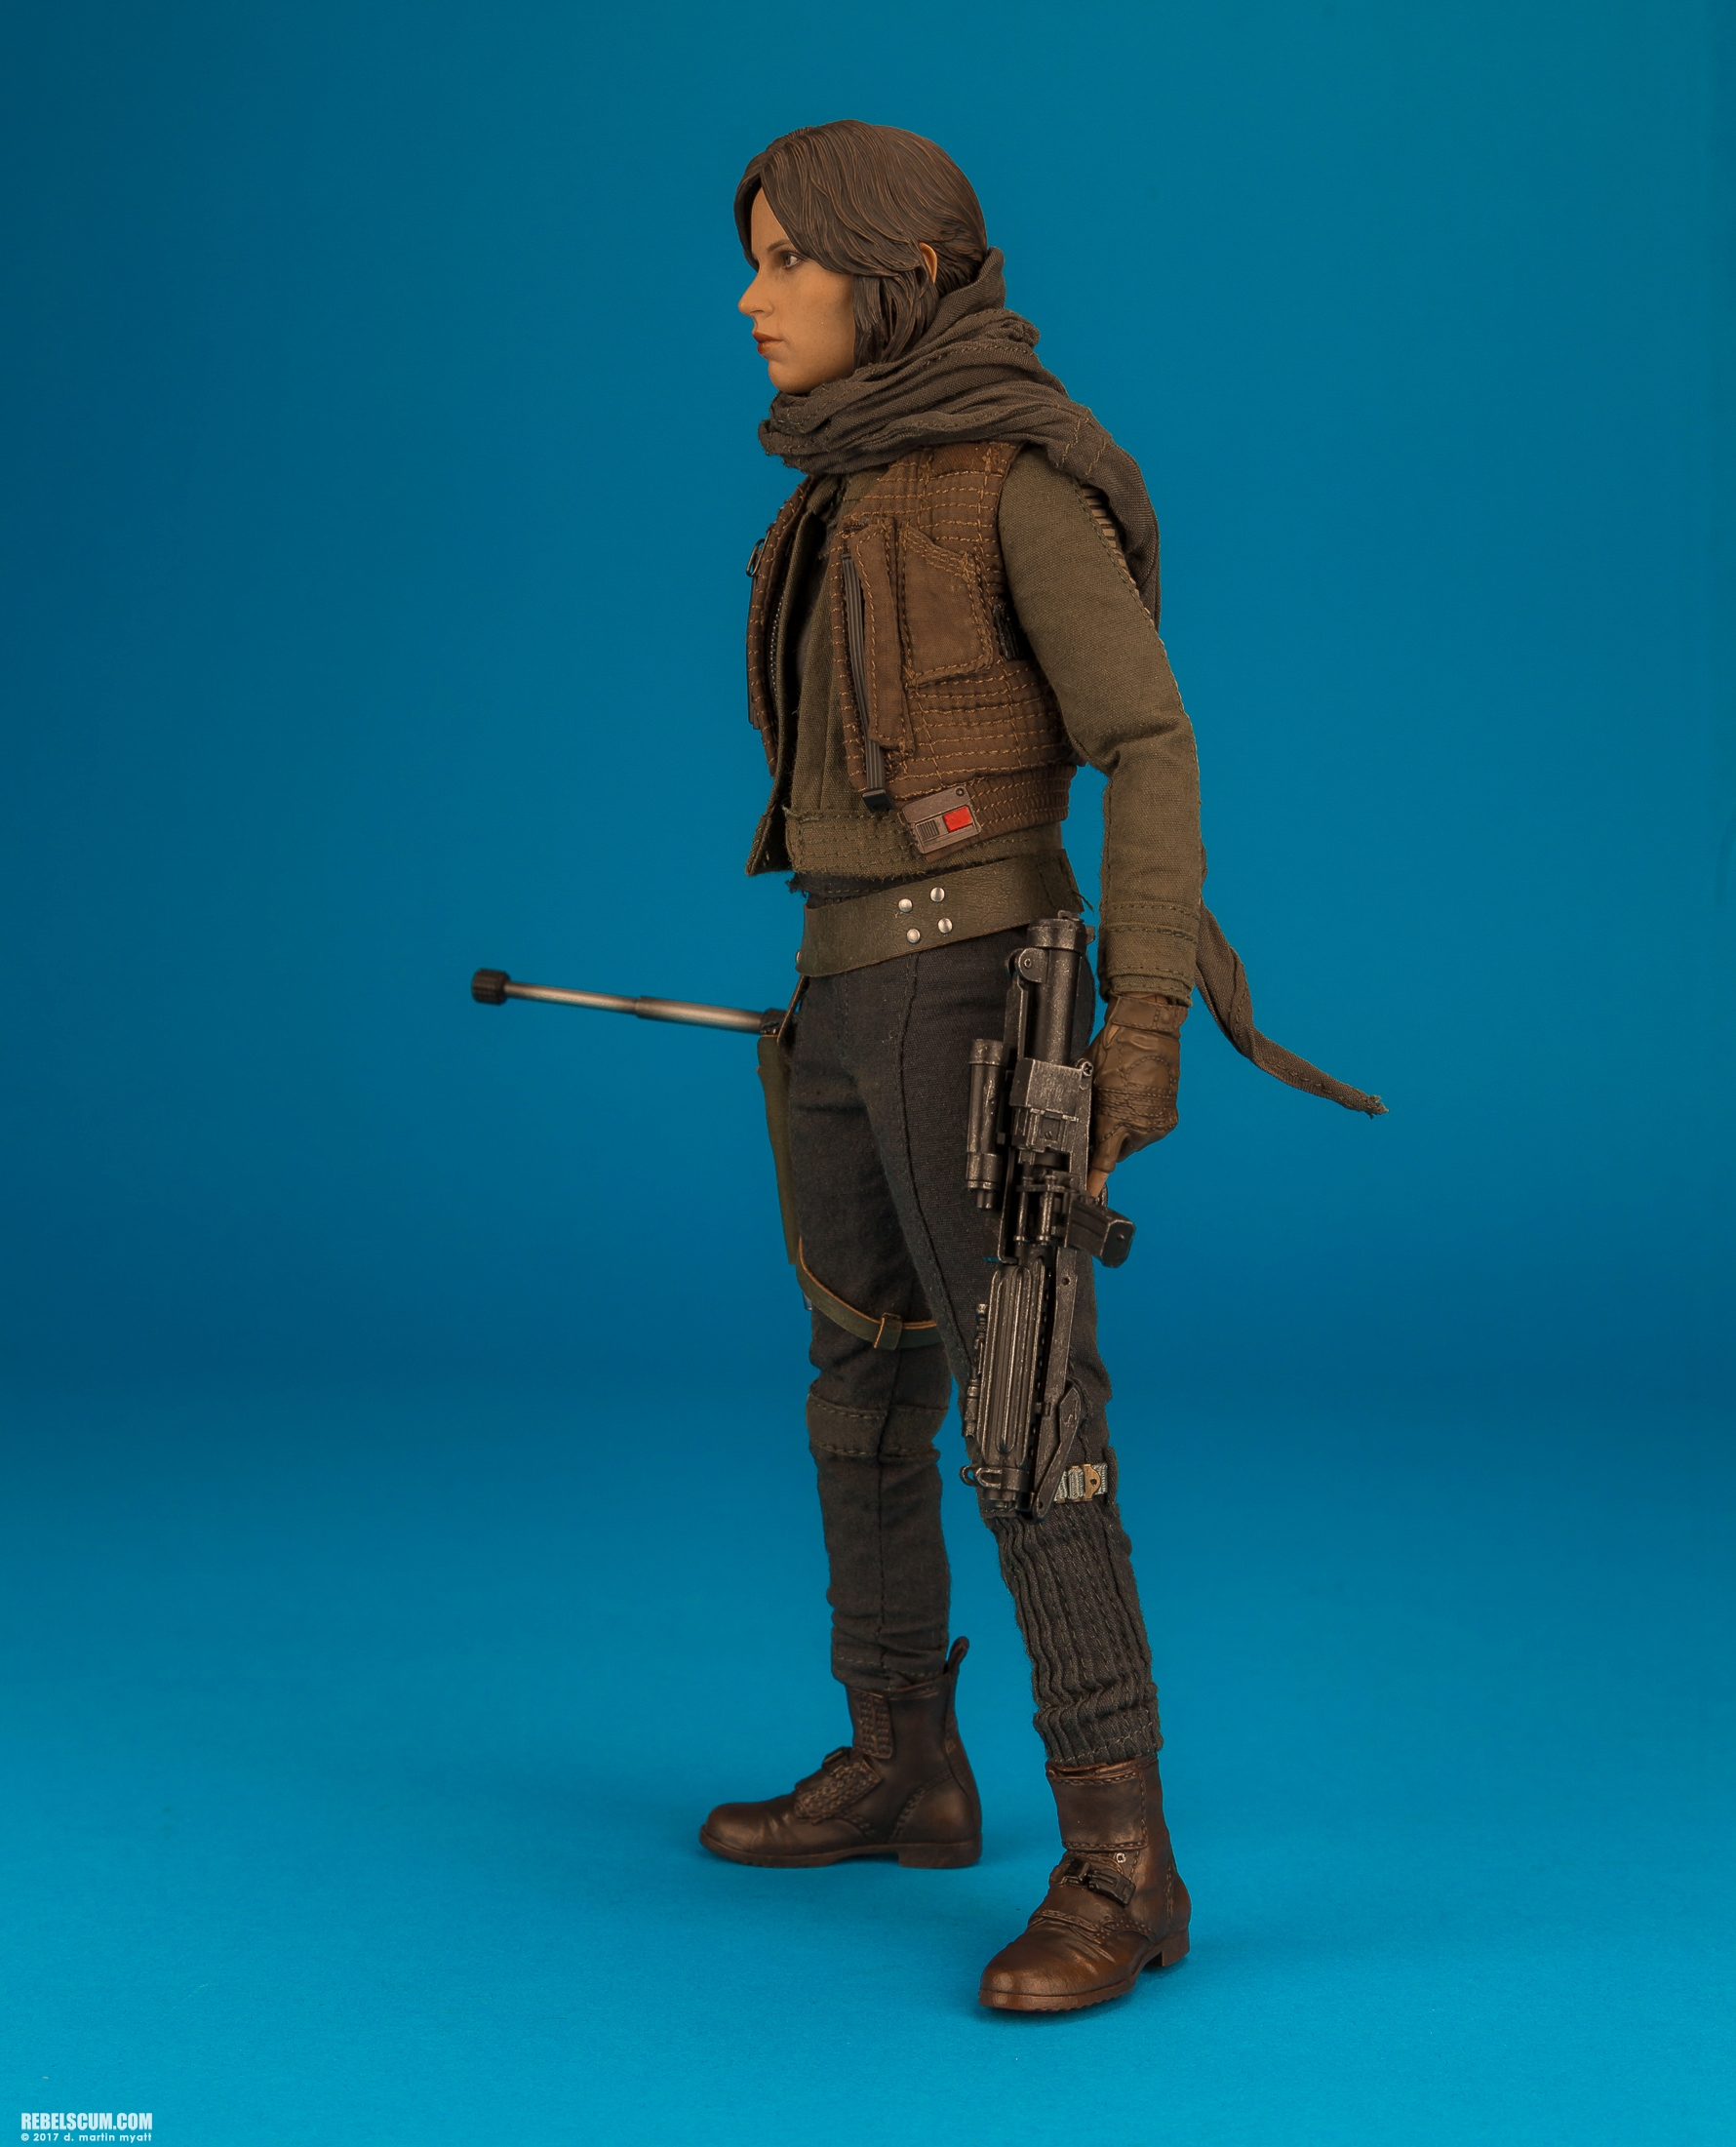 MMS405-Jyn-Erso-Deluxe-Star-Wars-Rogue-One-Hot-Toys-015.jpg